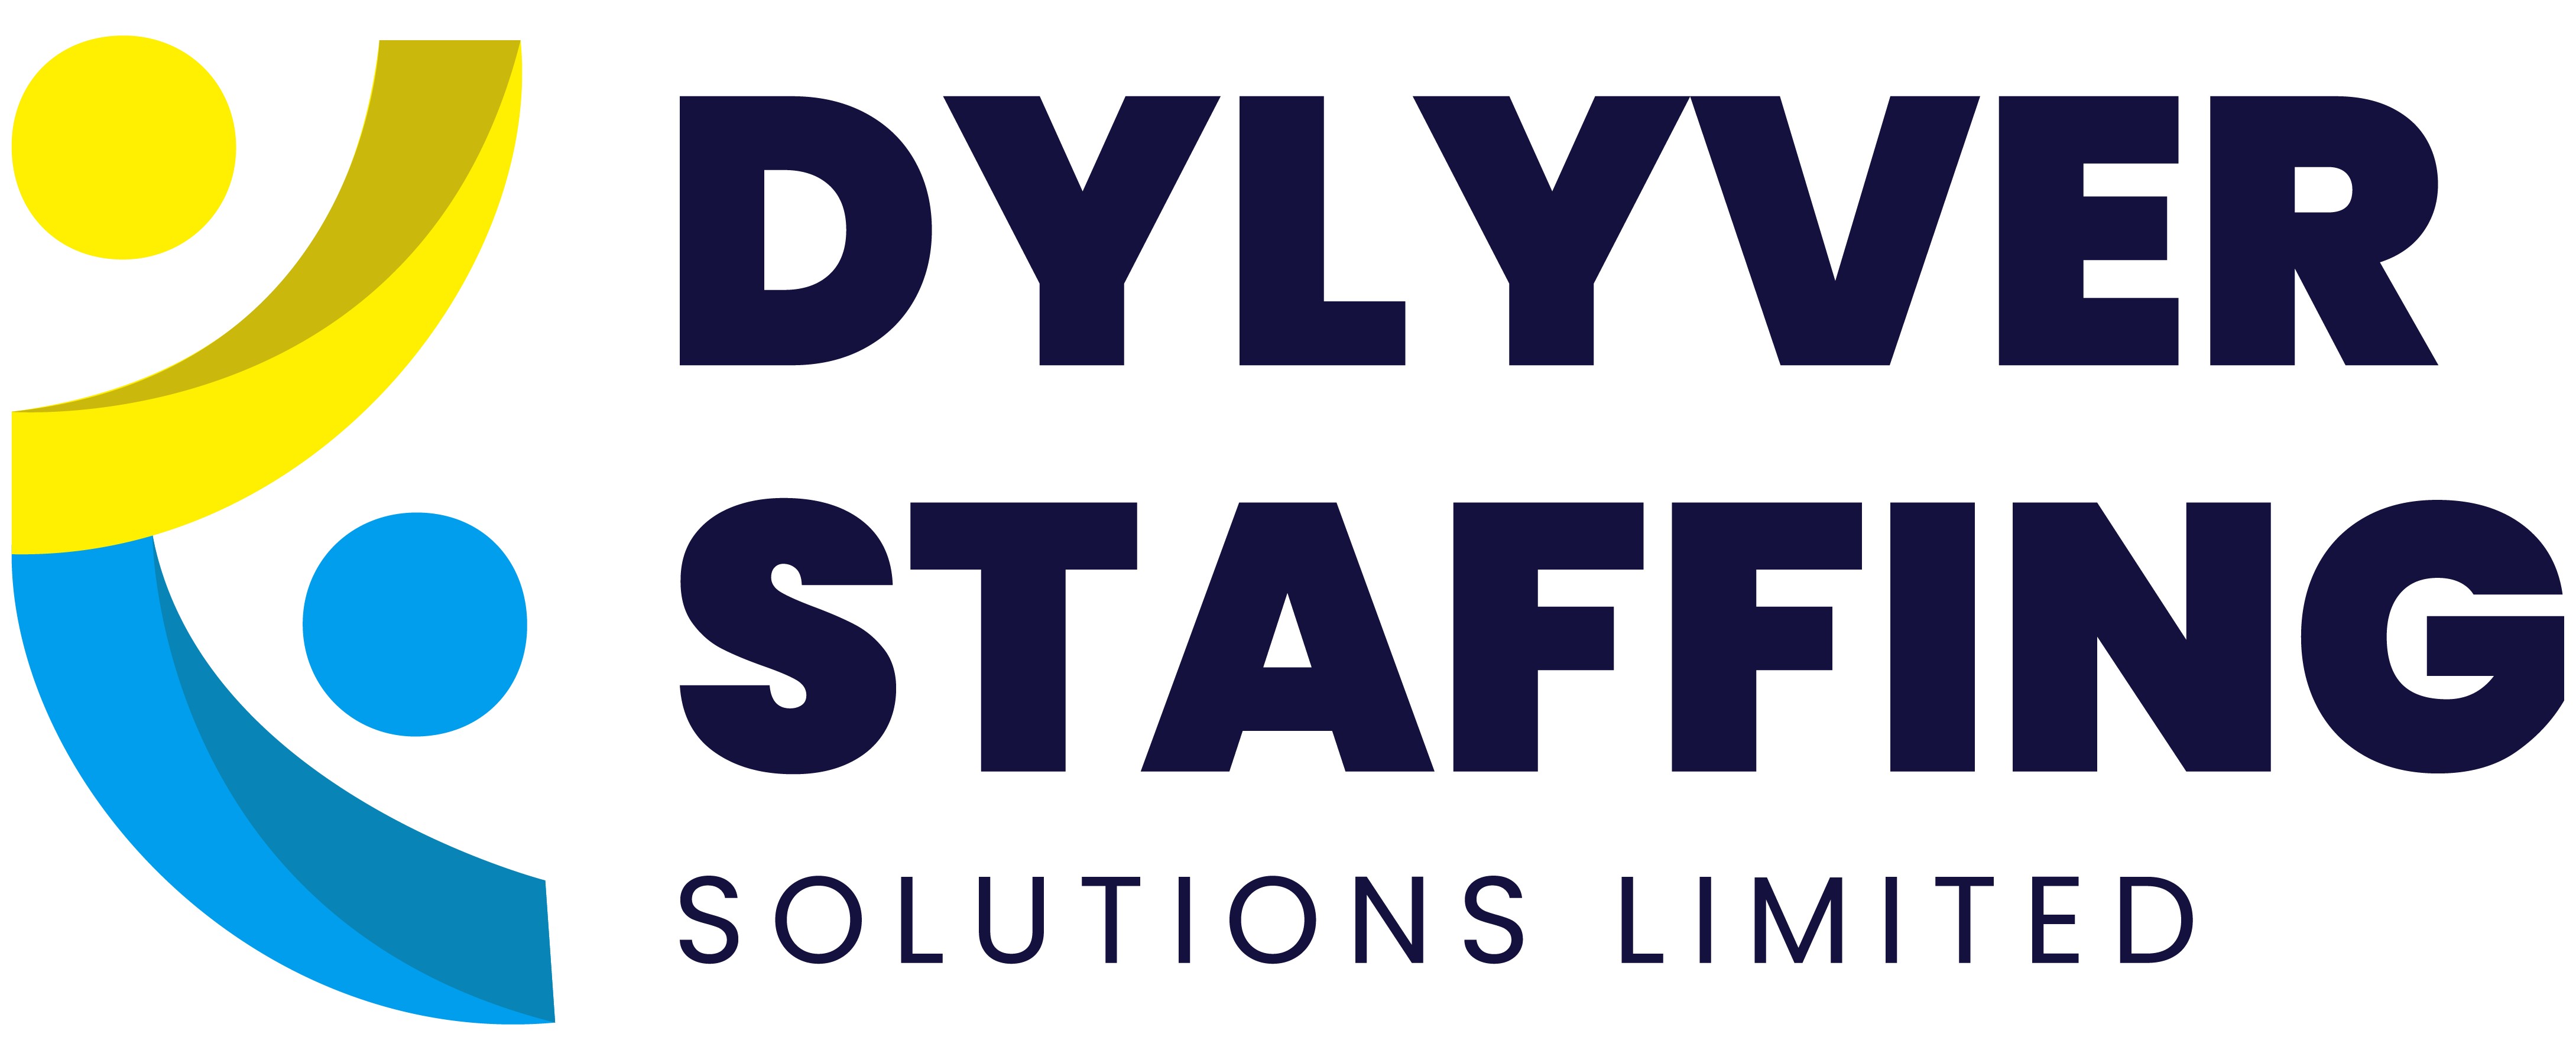 Dylyver Staffing Solutions Limited